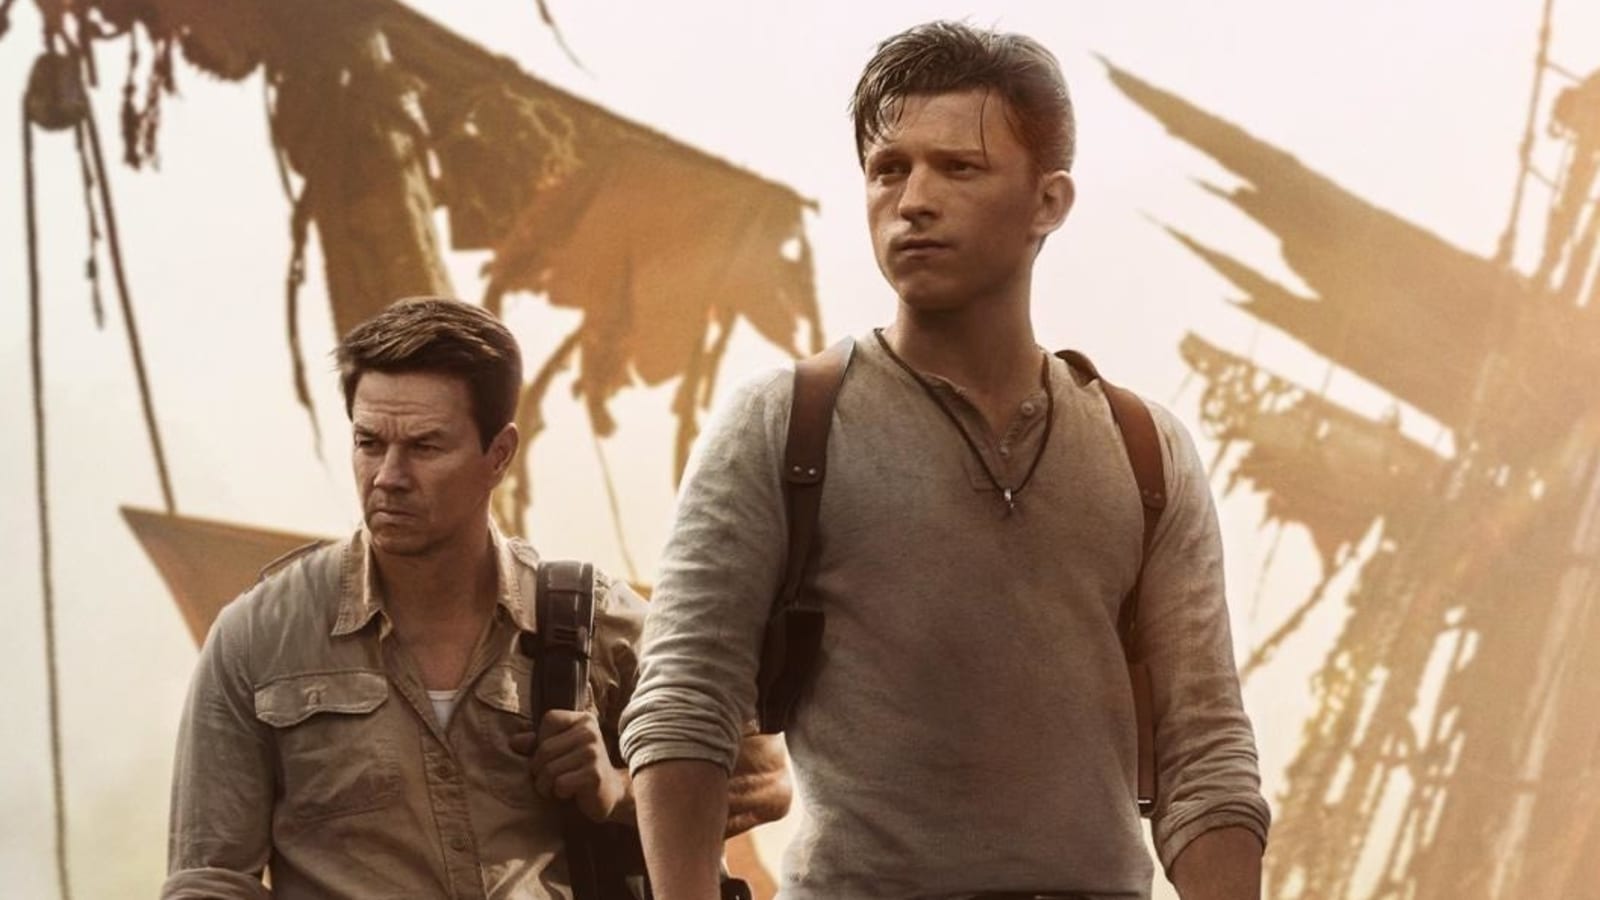 Uncharted' Movie Has The Biggest Action Sequences Of Tom Holland's